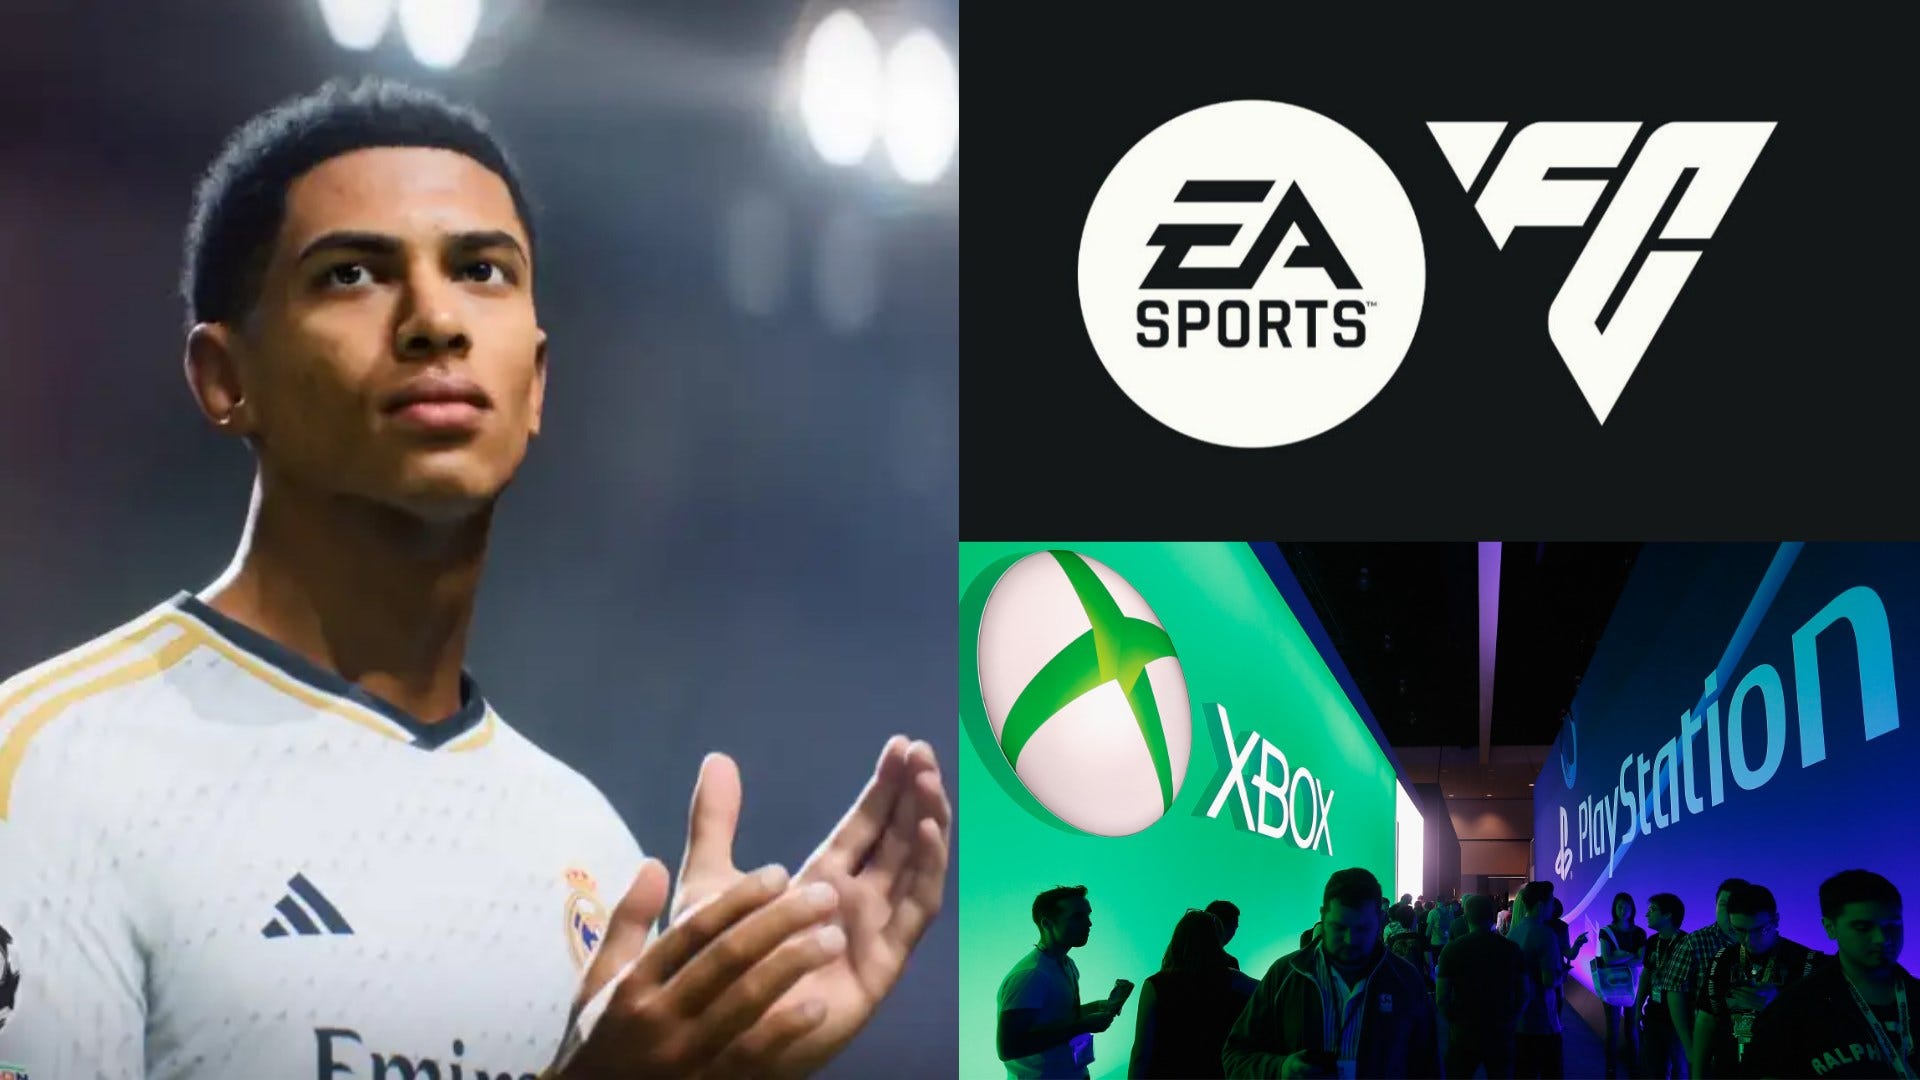 Get EA Sports FC Early Access & Join Testing Phase